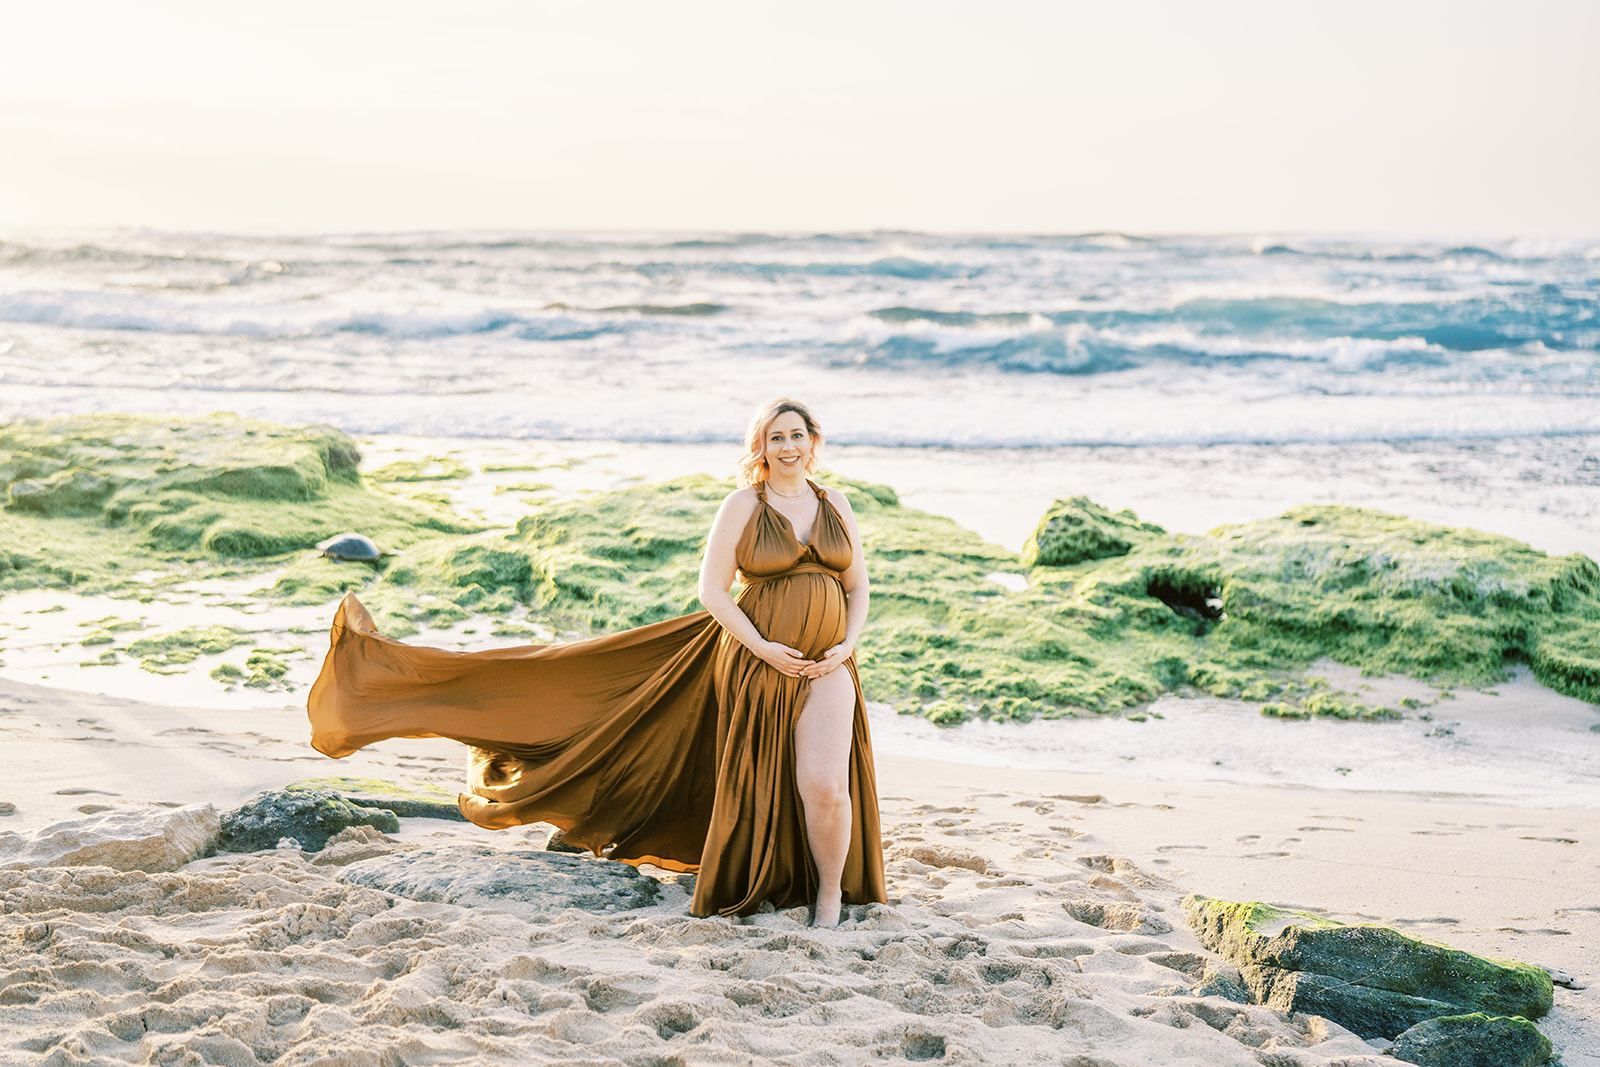 Pregnant woman in a flowing dress posing on the beach with the ocean in the background during sunset Maternity Session